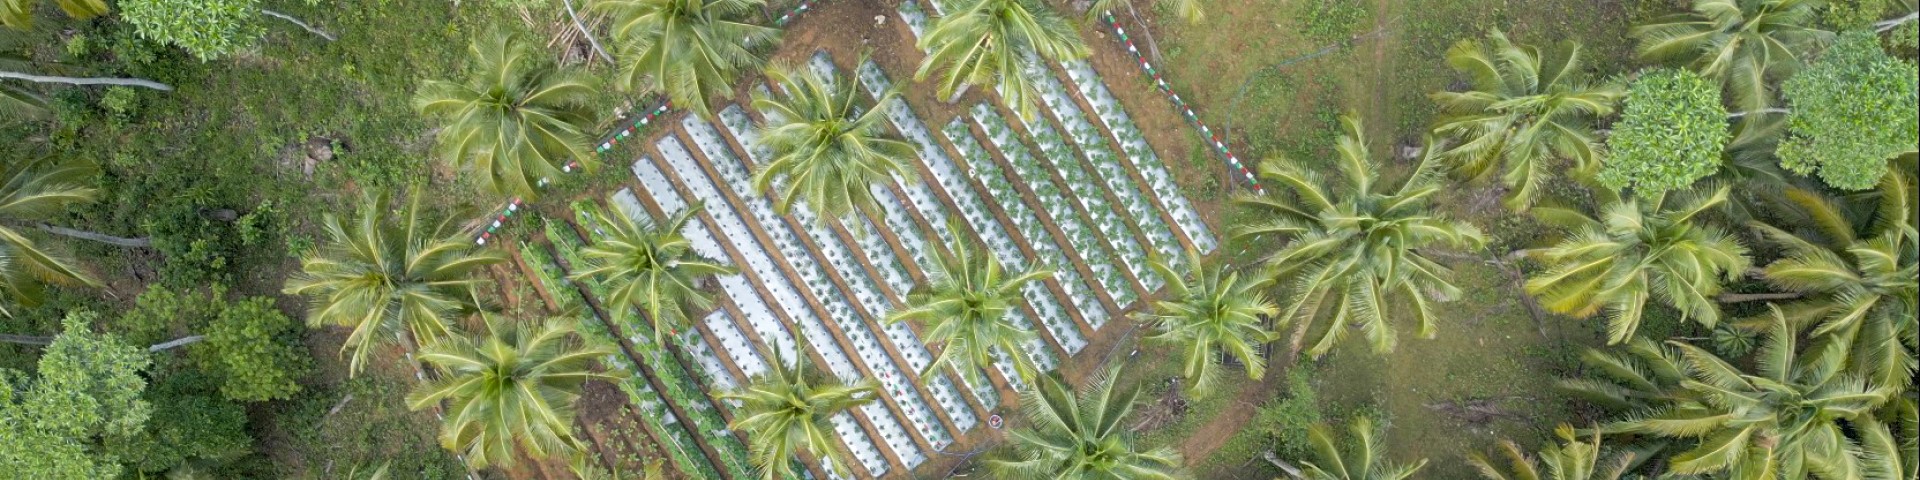 Aerial view of a mixed agricultural farm with rows of vegetable patches and coconut palm trees, demonstrating efficient land use and environmentally sustainable farming in a tropical setting. 